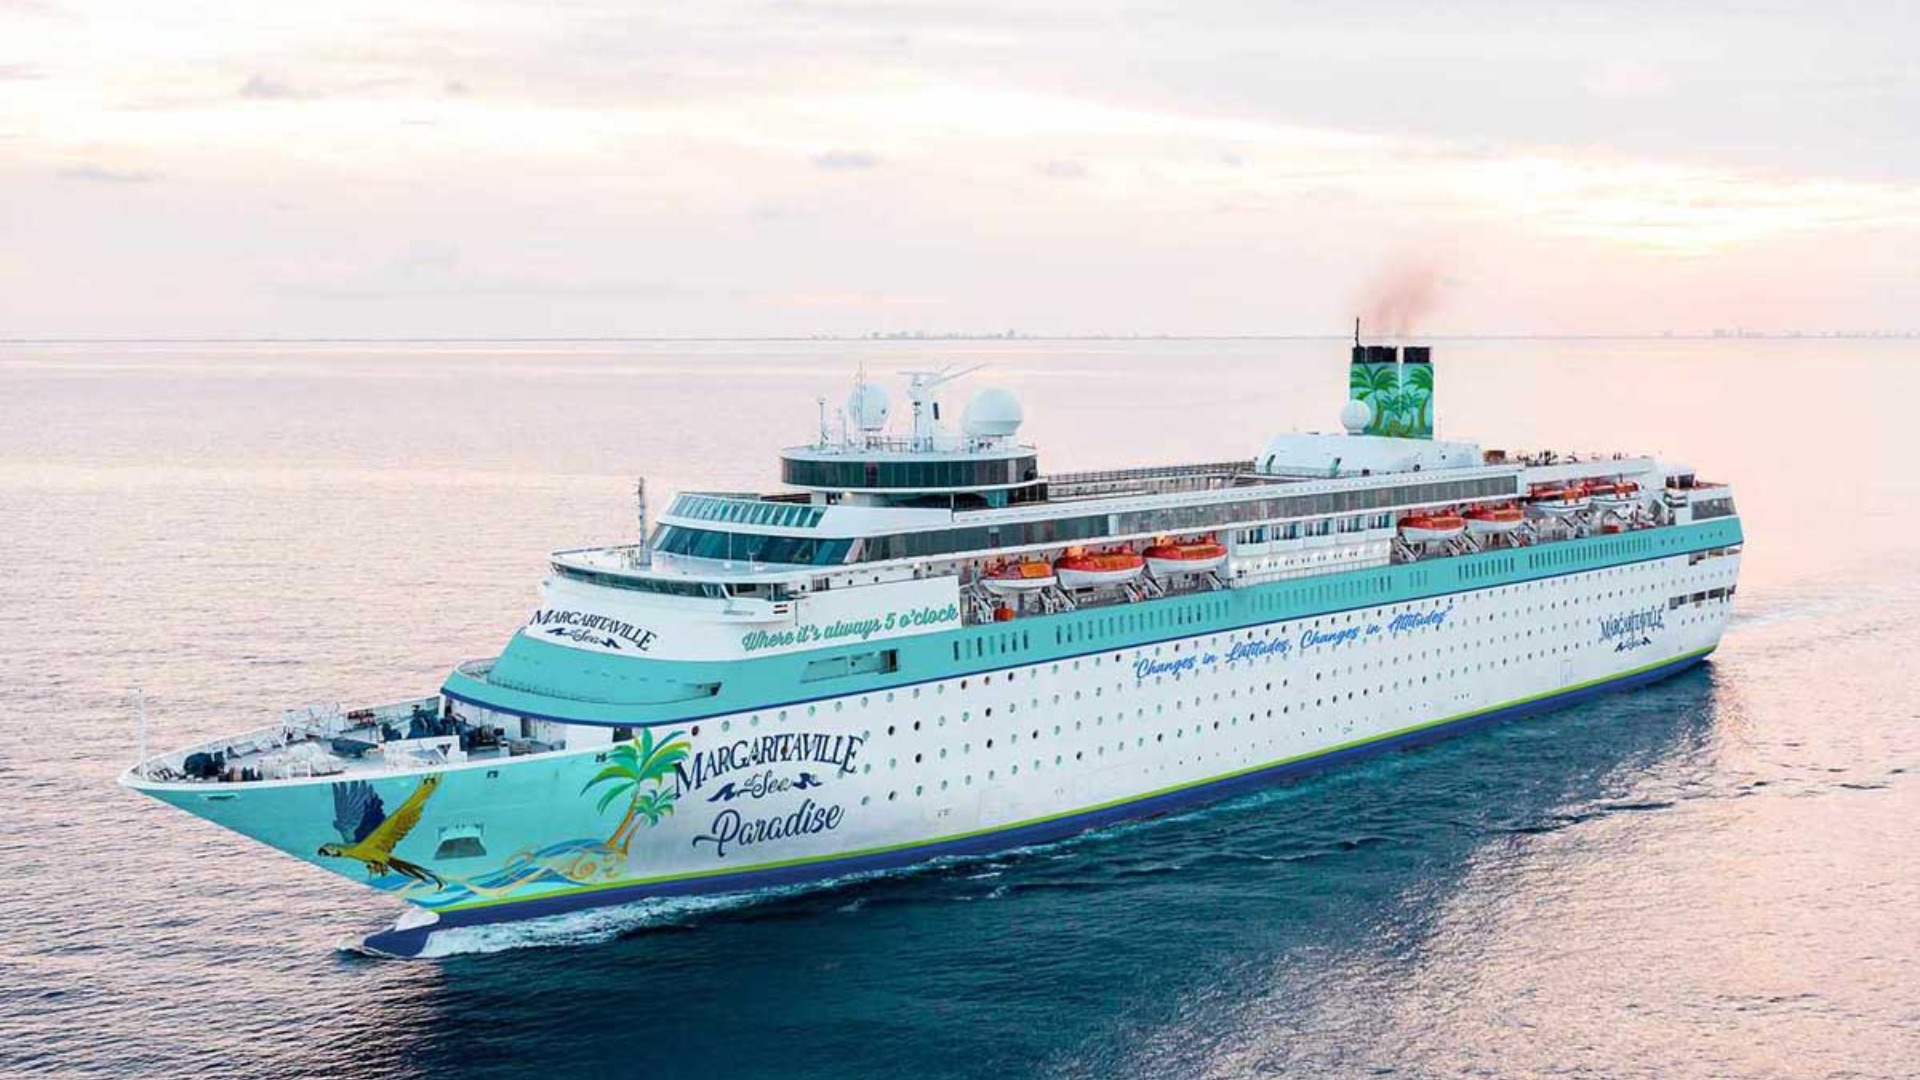 A ticket aboard Margaritaville's new cruise line can run as low as